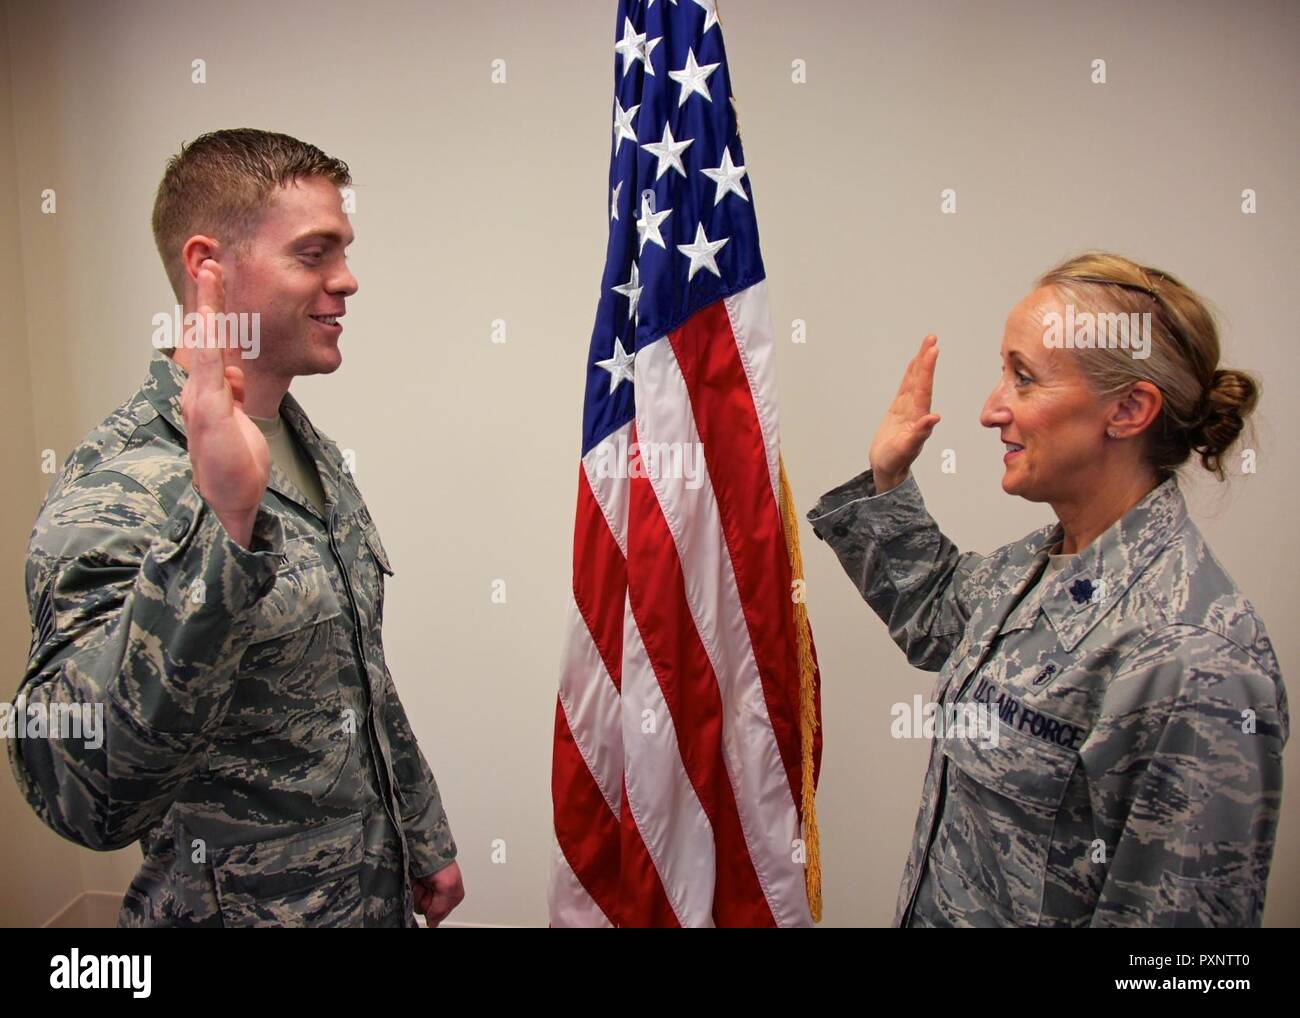 Staff Sgt. Brandon Issler takes the oath of enlistment again as administered by Lt. Col. Carole Lowe during the 932nd Airlift Wing drill held on June 4, 2017 at Scott Air Force Base, Illinois.  They are both members of the 932nd Aerospace Medicine Squadron.  AMDS keeps the unit humming medically with physicals and blood pressure checks, just a small part of the large amount of work that occurs to keep Airmen healthy and ready to deploy in the wing. Stock Photo